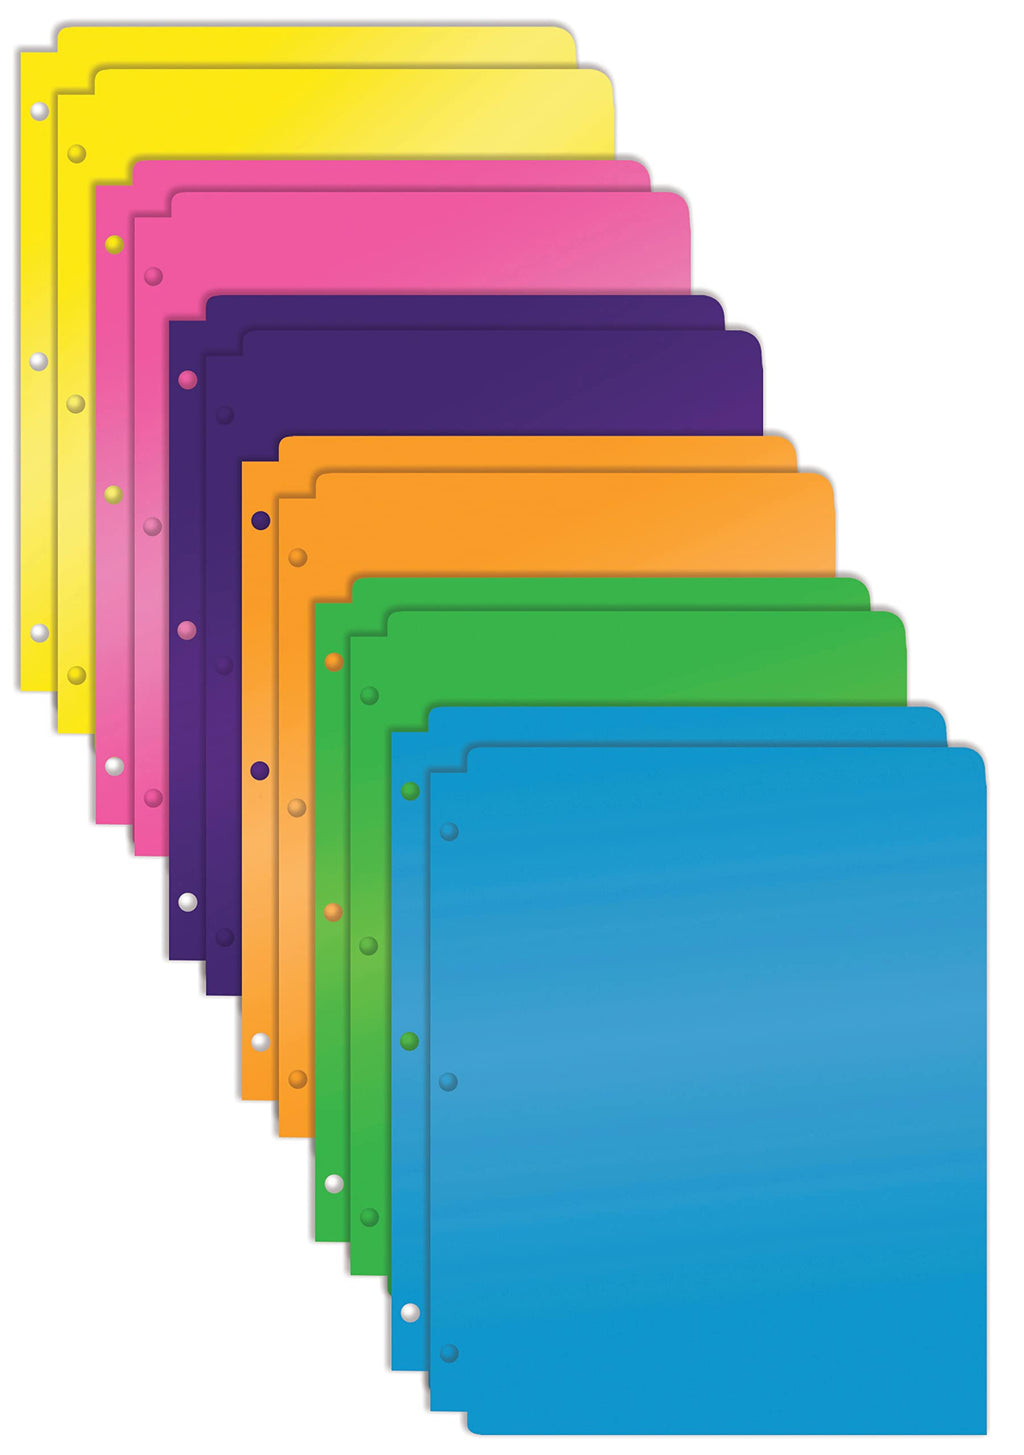 [Australia - AusPower] - 3 Hole Punch Pocket Folders, Heavyweight Plastic 2 Pocket Folders, Bulk Pack, Assorted Bright Neon Colors, Letter Size, with Business Card Slot, by Better Office Products (12 Pack) 12 